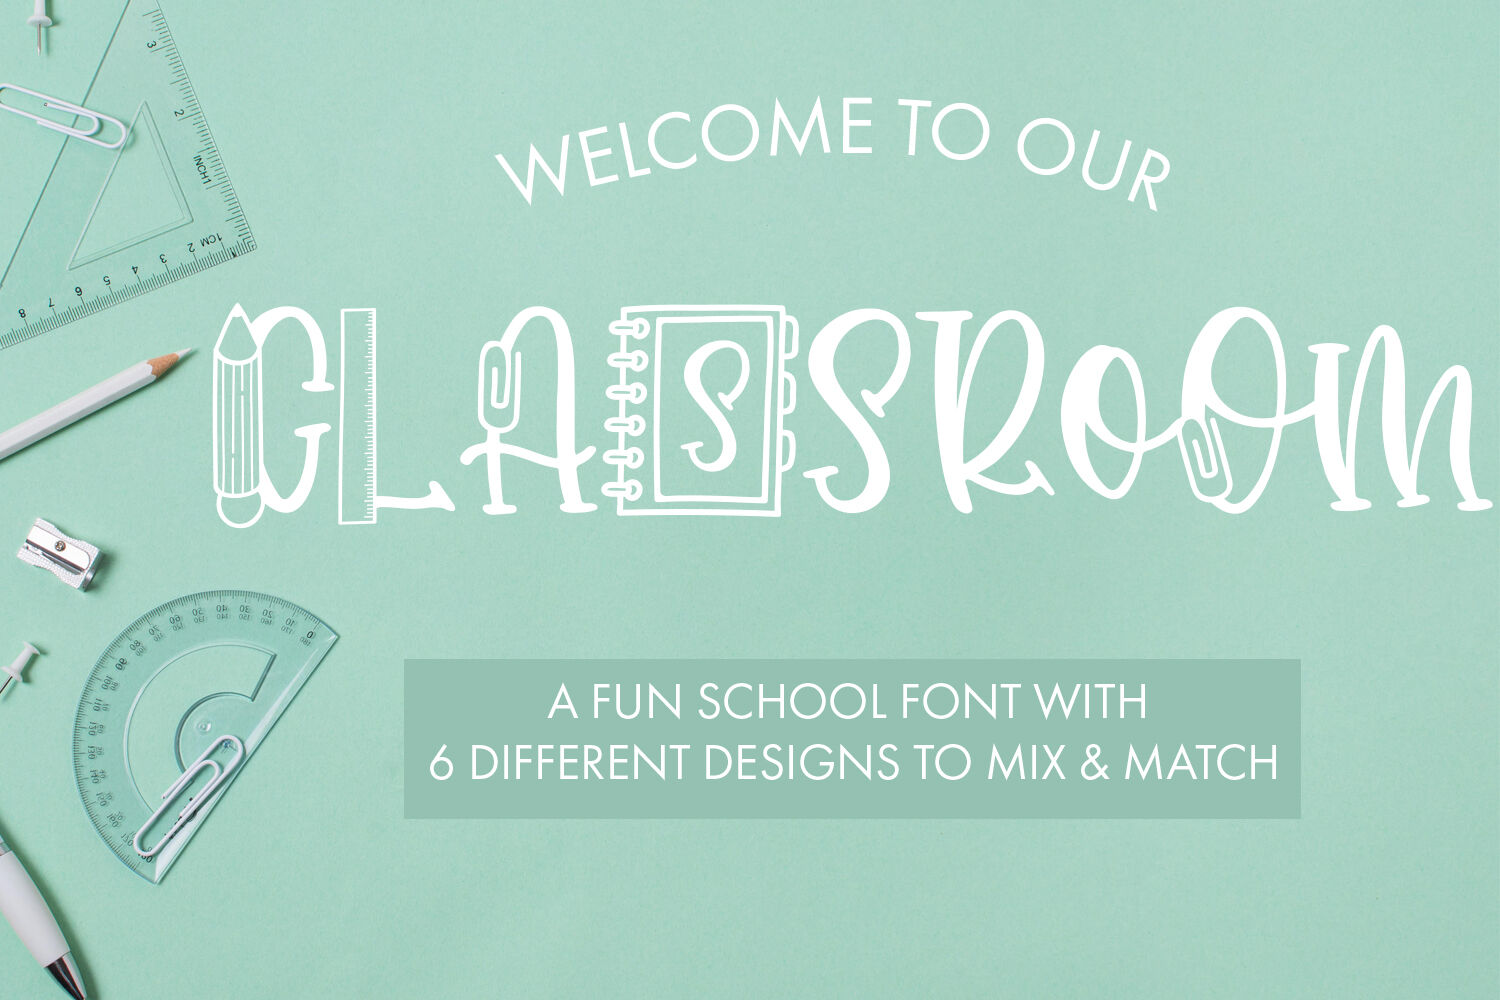 Classroom A Fun School Font With 6 Designs By Freeling Design House Thehungryjpeg Com